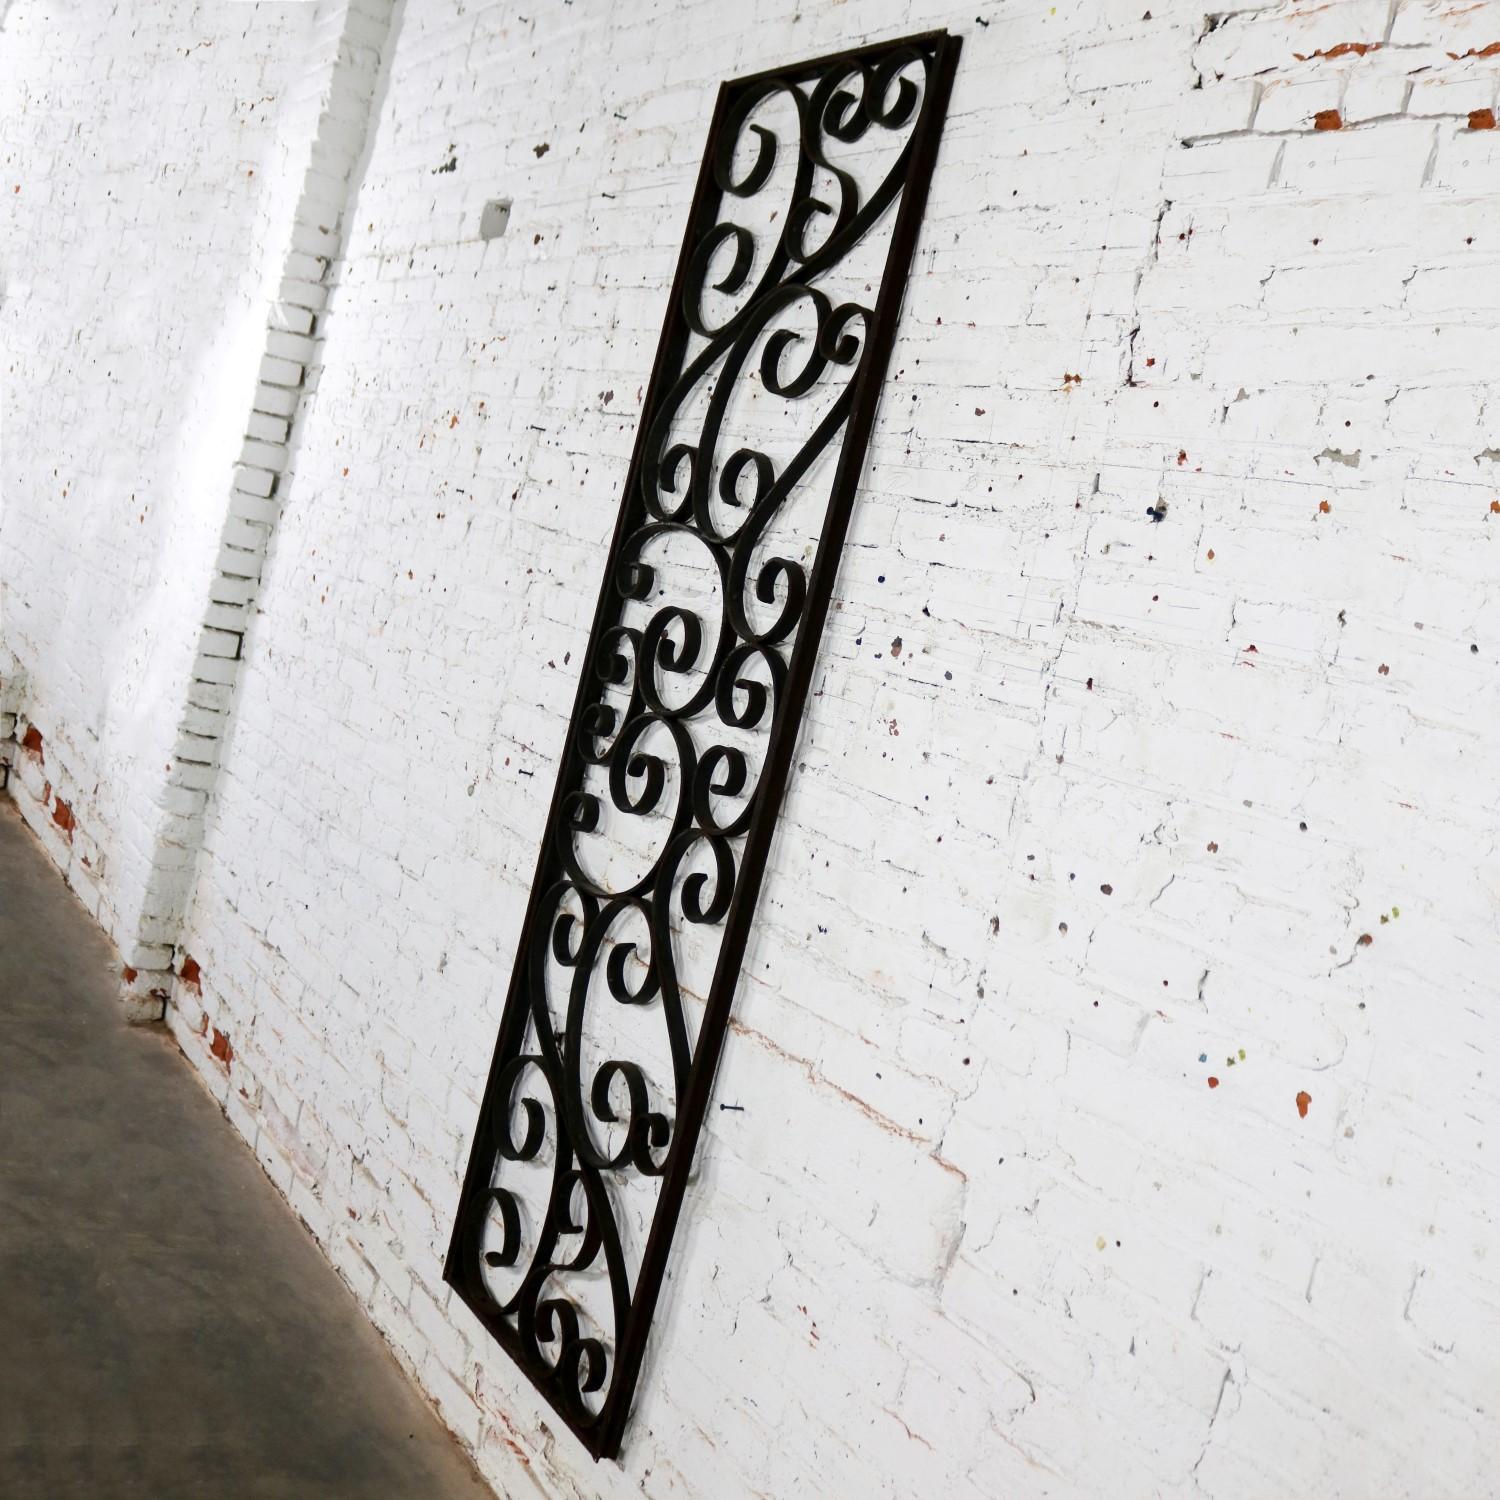 20th Century Antique Swirled Design Wrought Iron Railing Piece Trellis or Fence Section For Sale